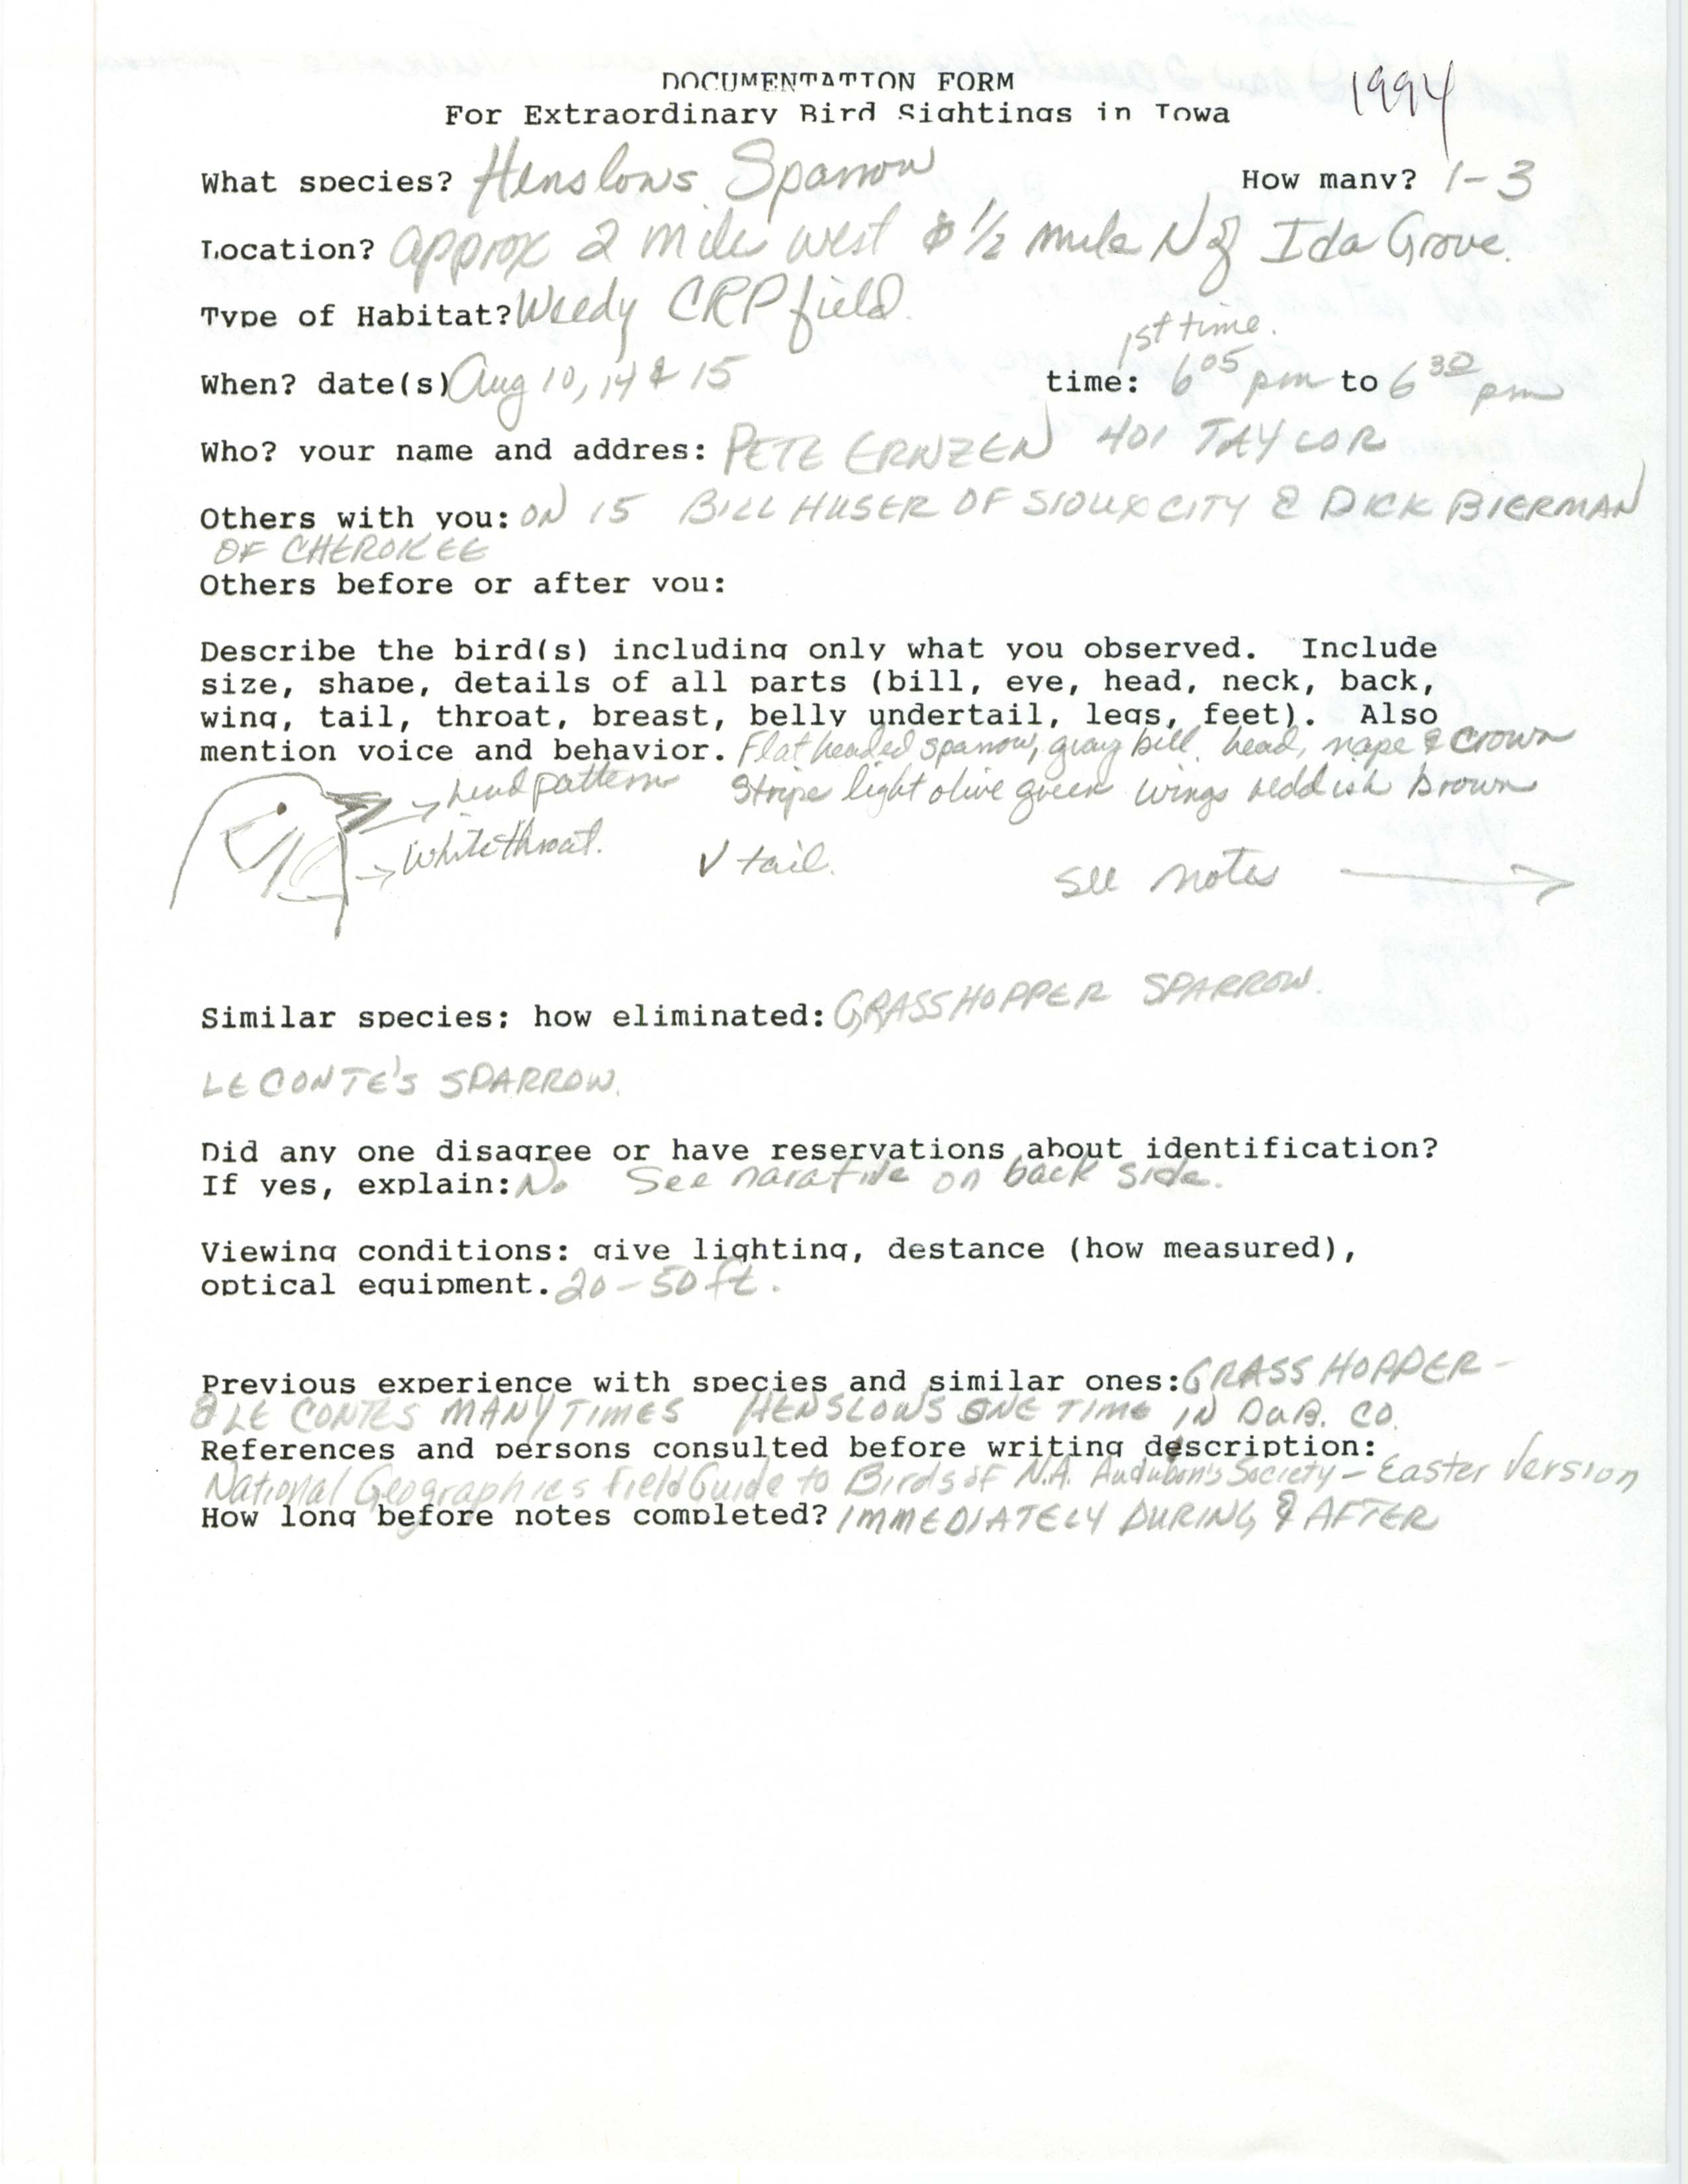 Rare bird documentation form for Henslow's Sparrow west and north of Ida Grove in 1994